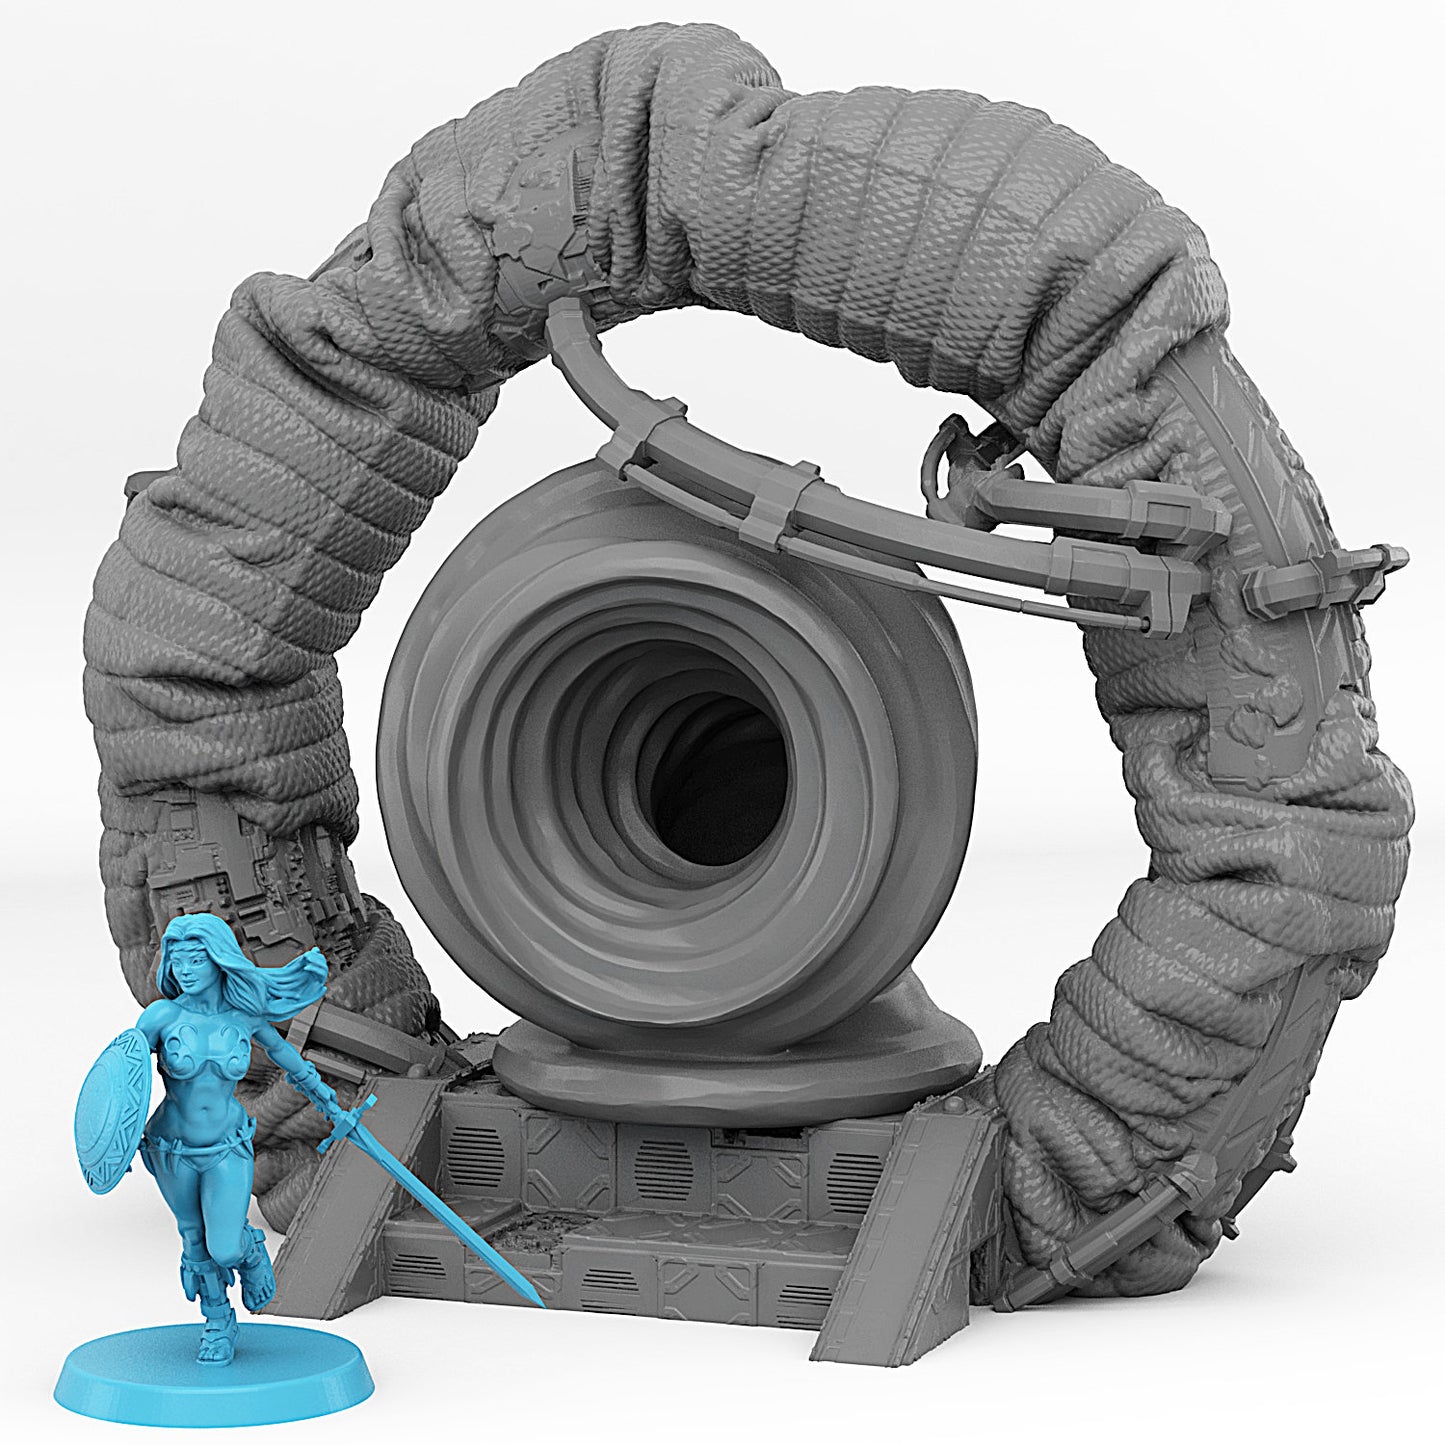 Spaceship Portal | Scenery and terrain | 3D Printed Resin Miniature | Tabletop Role Playing | AoS | D&D | 40K | Pathfinder